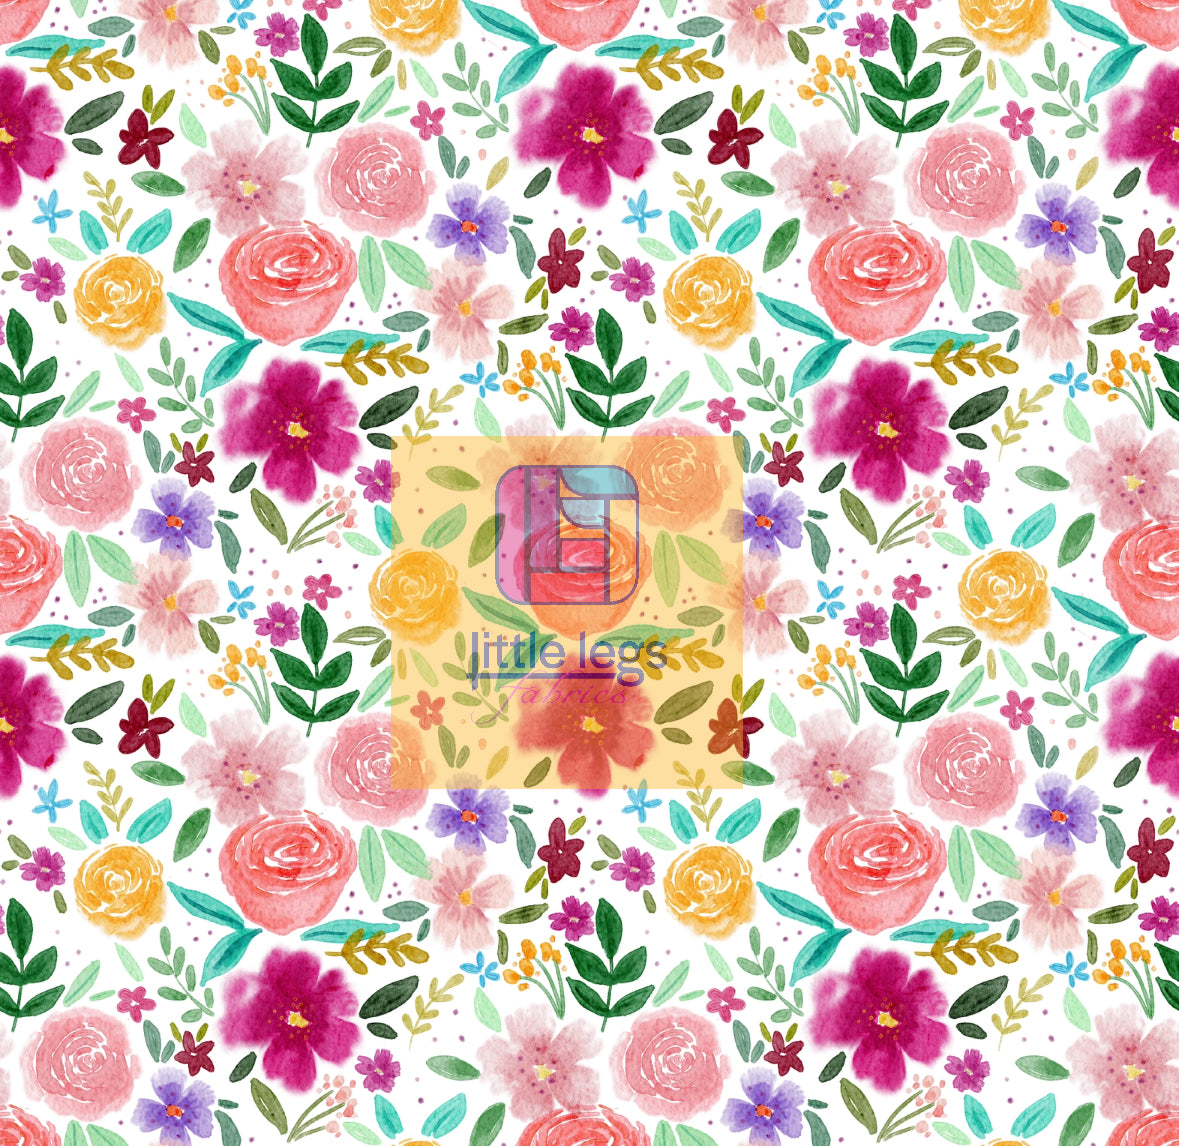 PRE ORDER Rose Pink Floral Cotton Jersey Fabric - DUE IN STOCK EARLY MAY